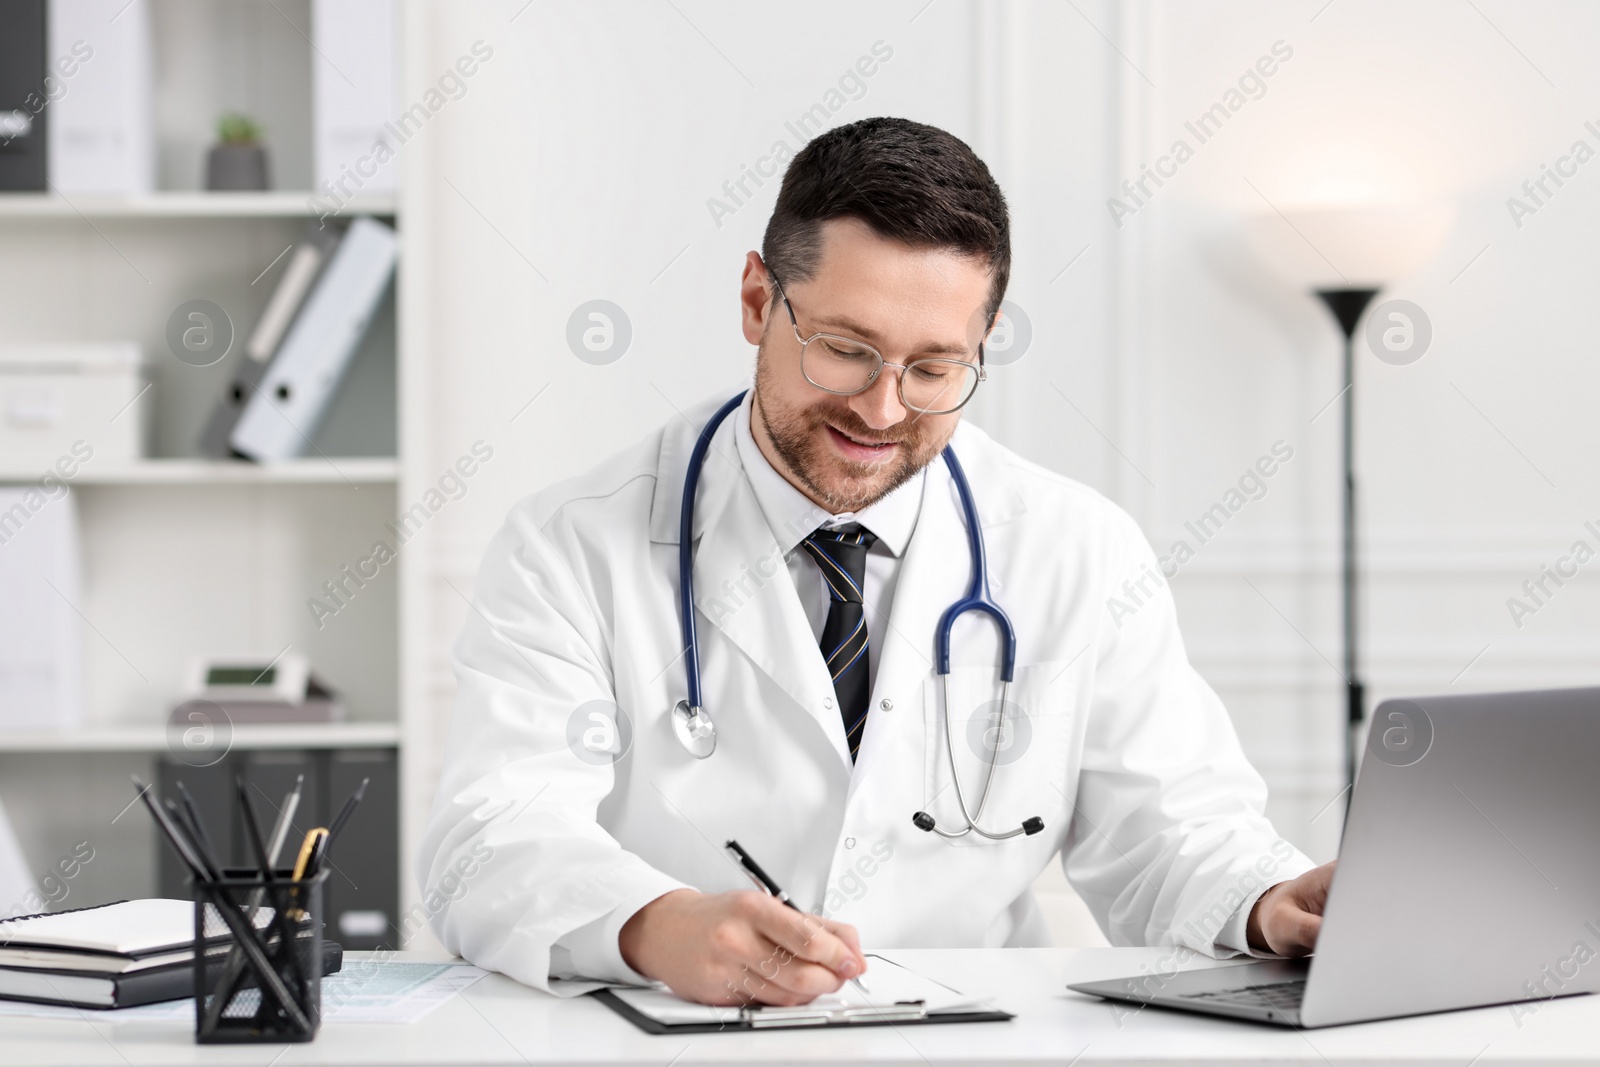 Photo of Smiling doctor having online consultation via laptop at table in clinic